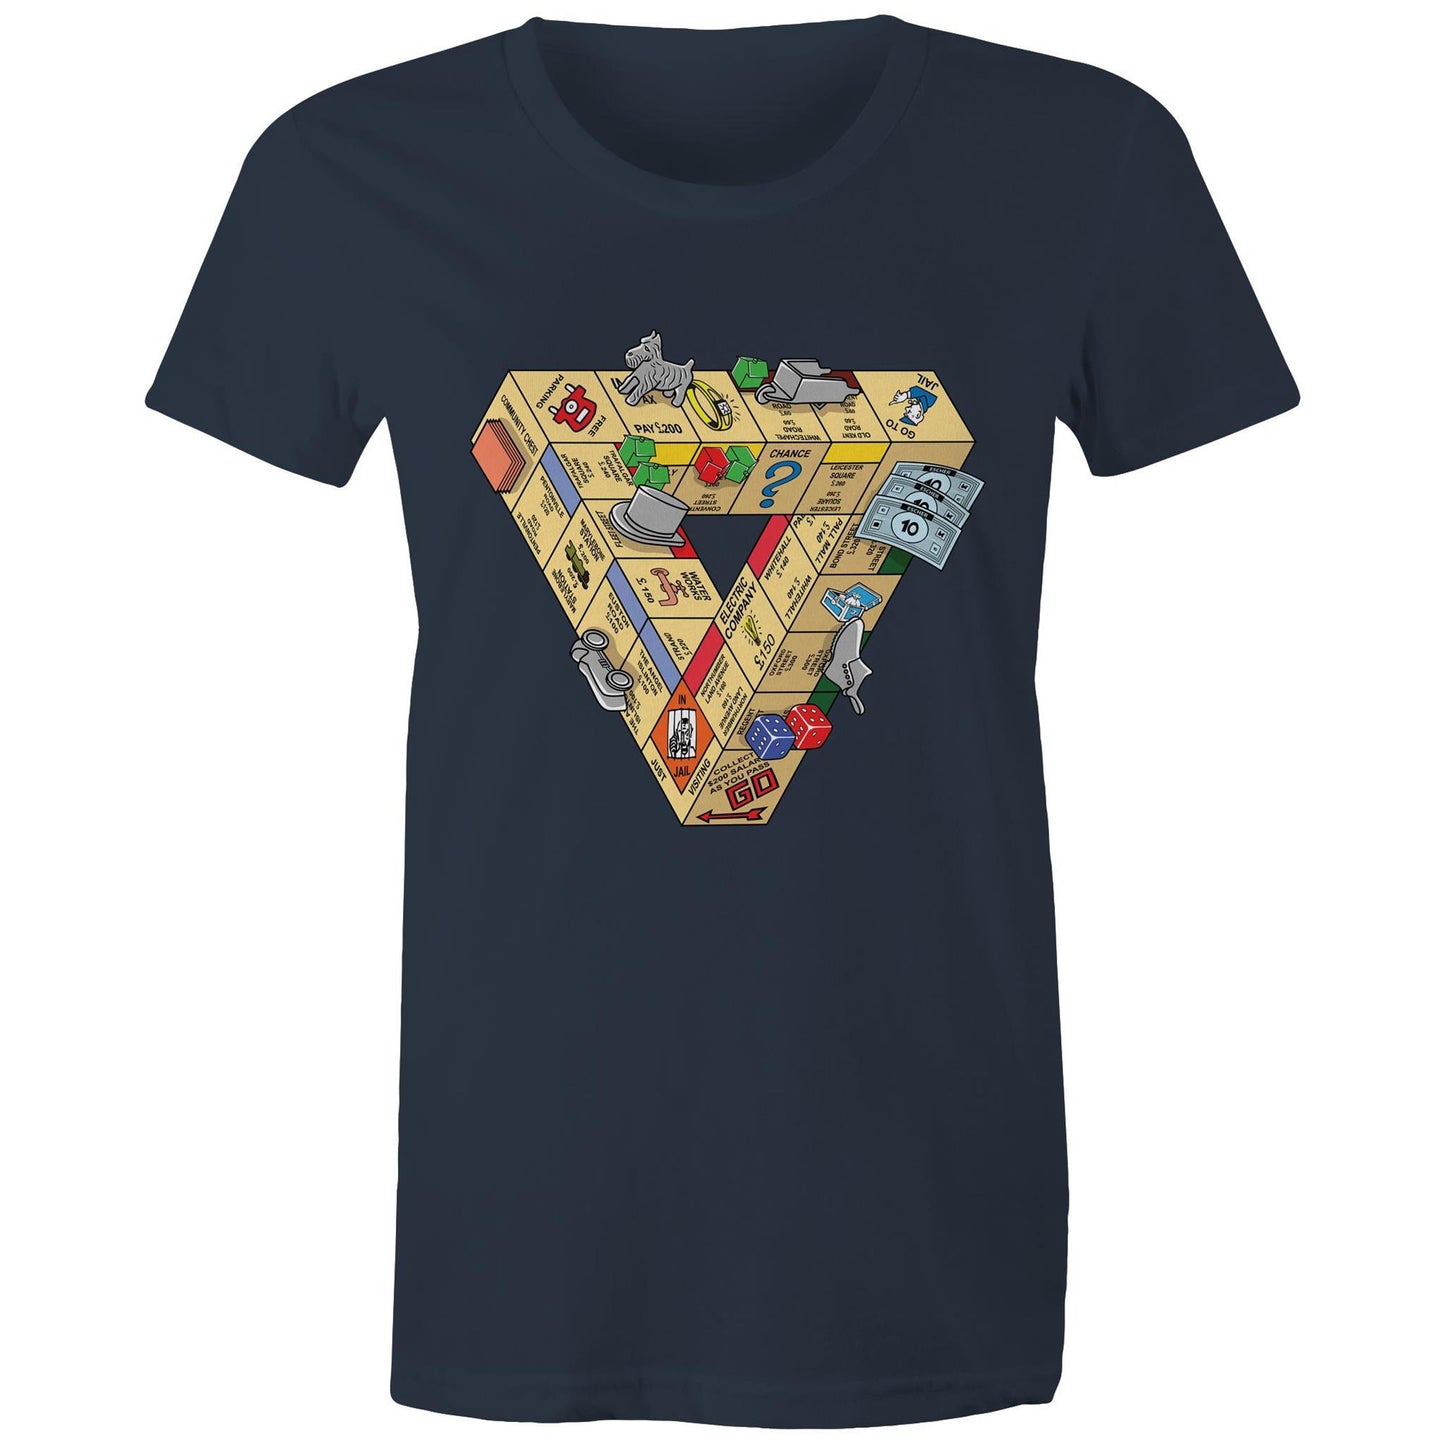 The Impossible Board Game - Women's T-Shirt